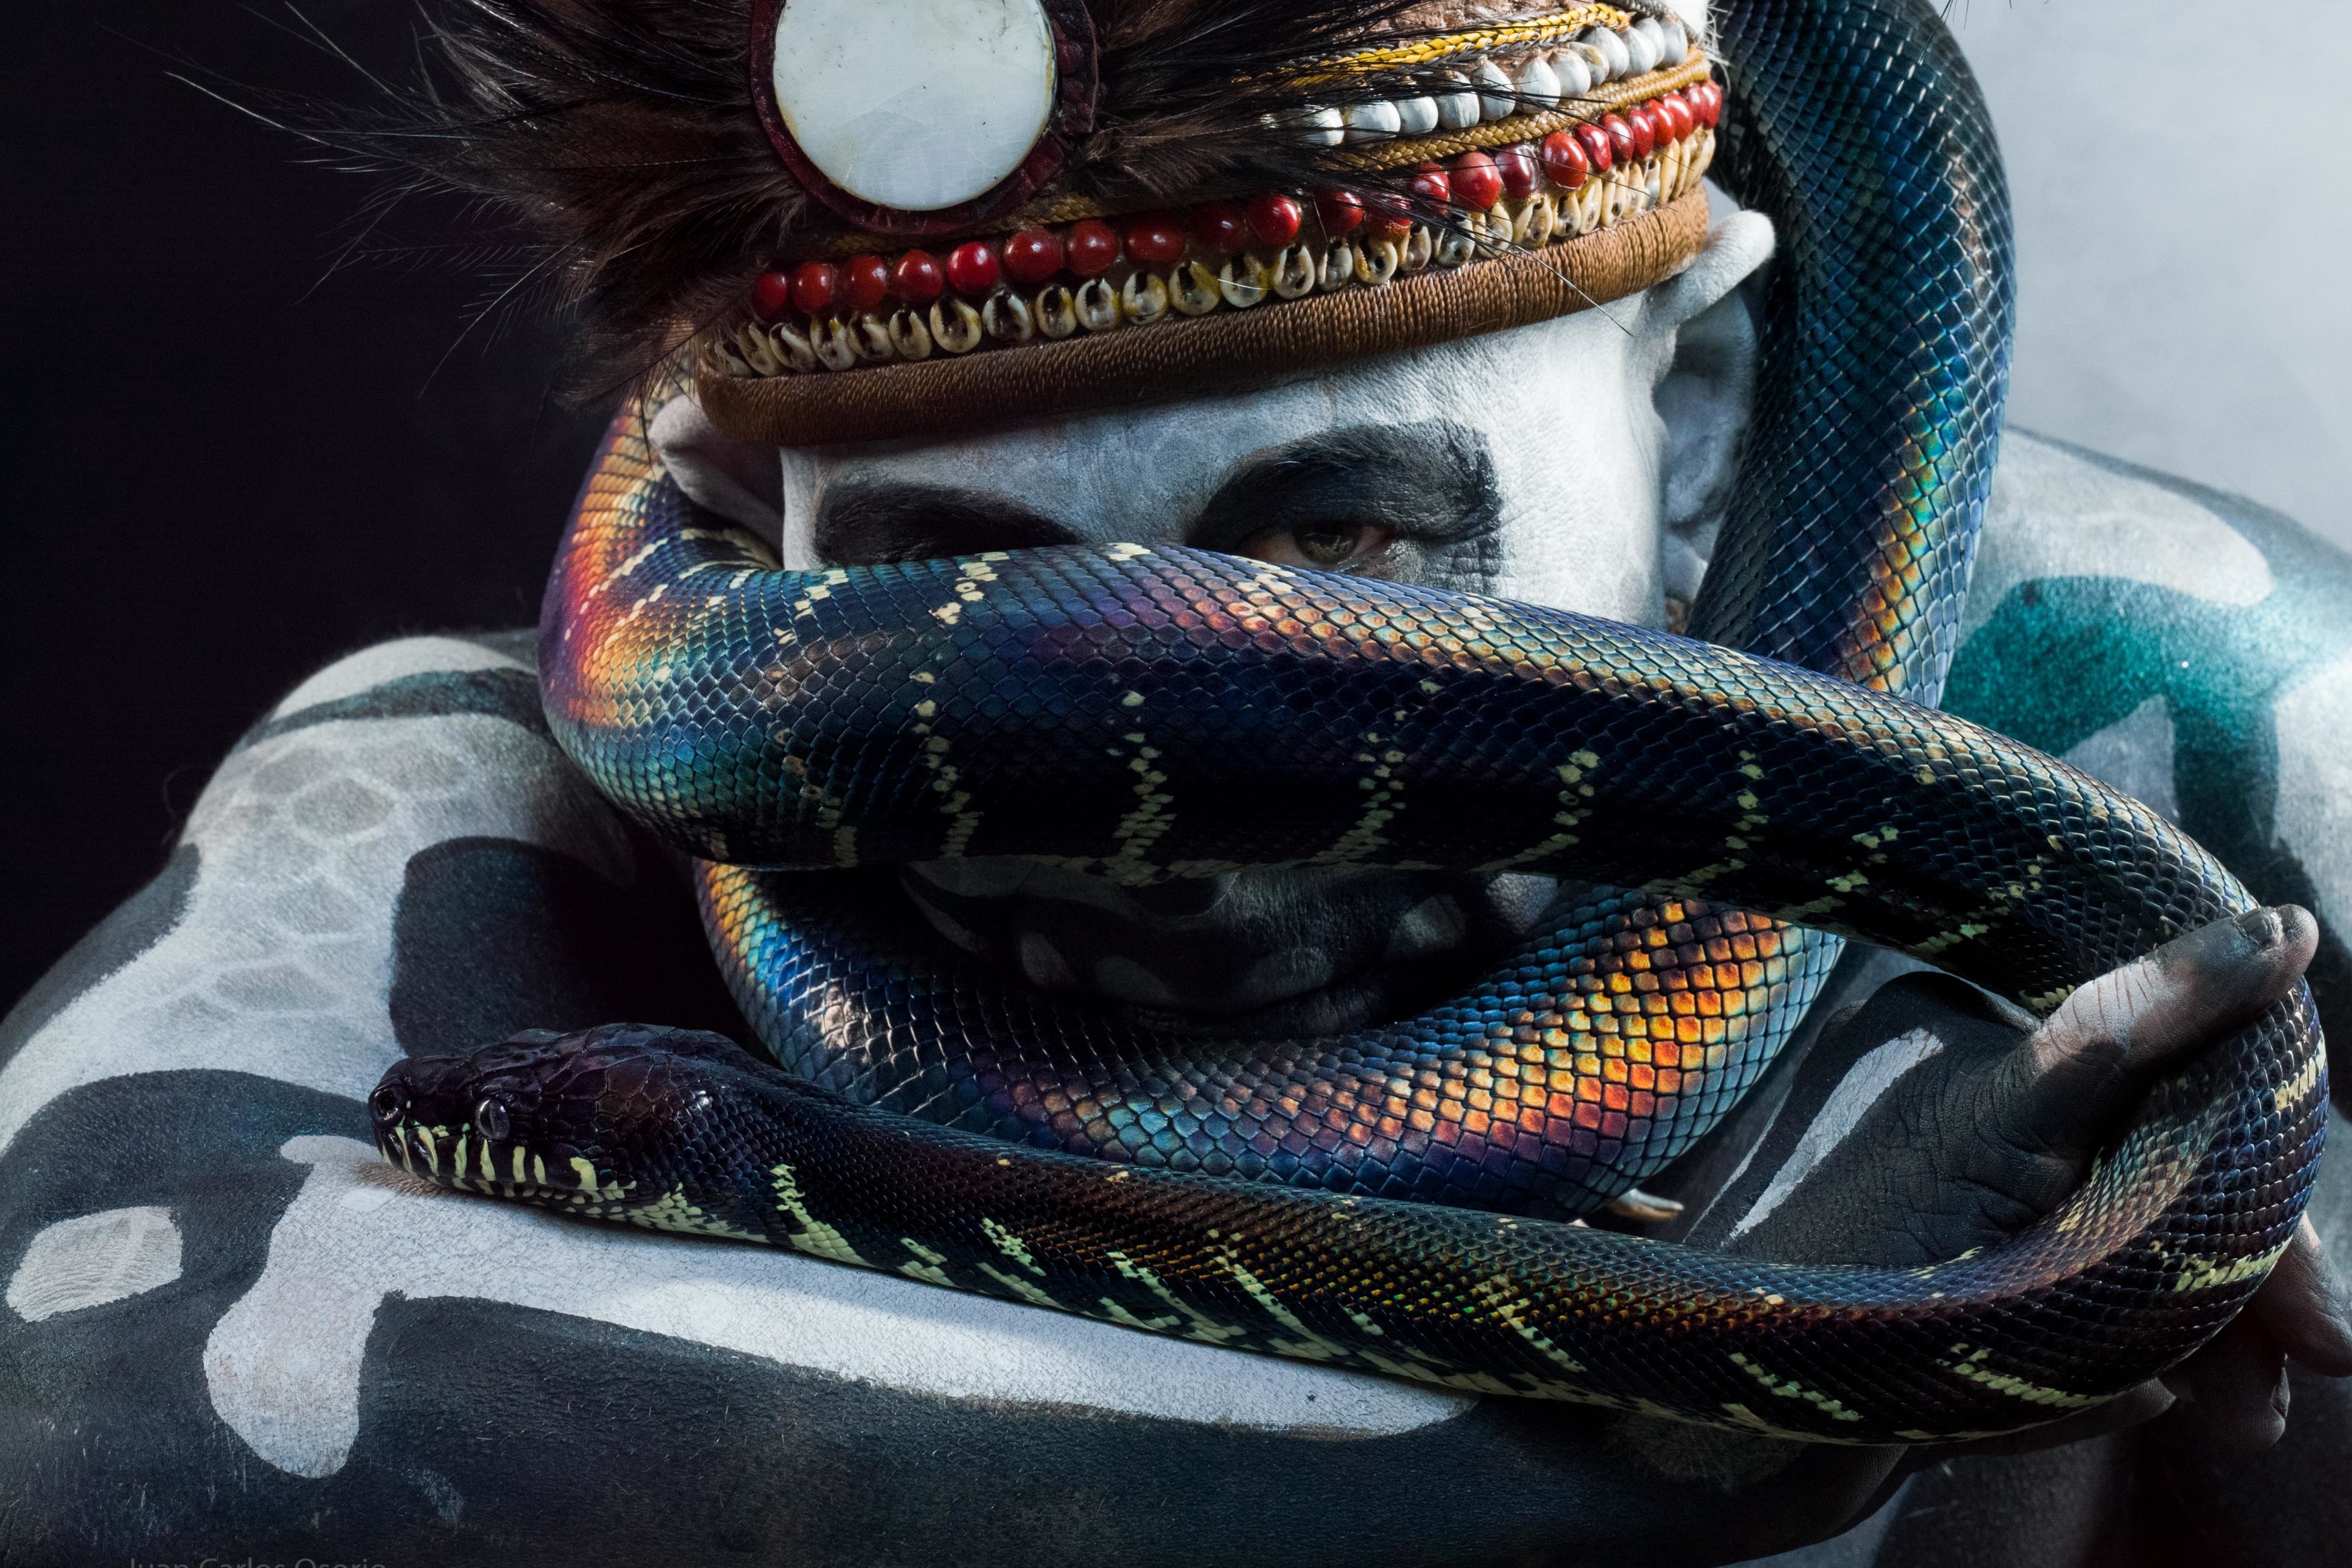 Unbelievable Portraits of a New Guinea Snake Charmer and His Python